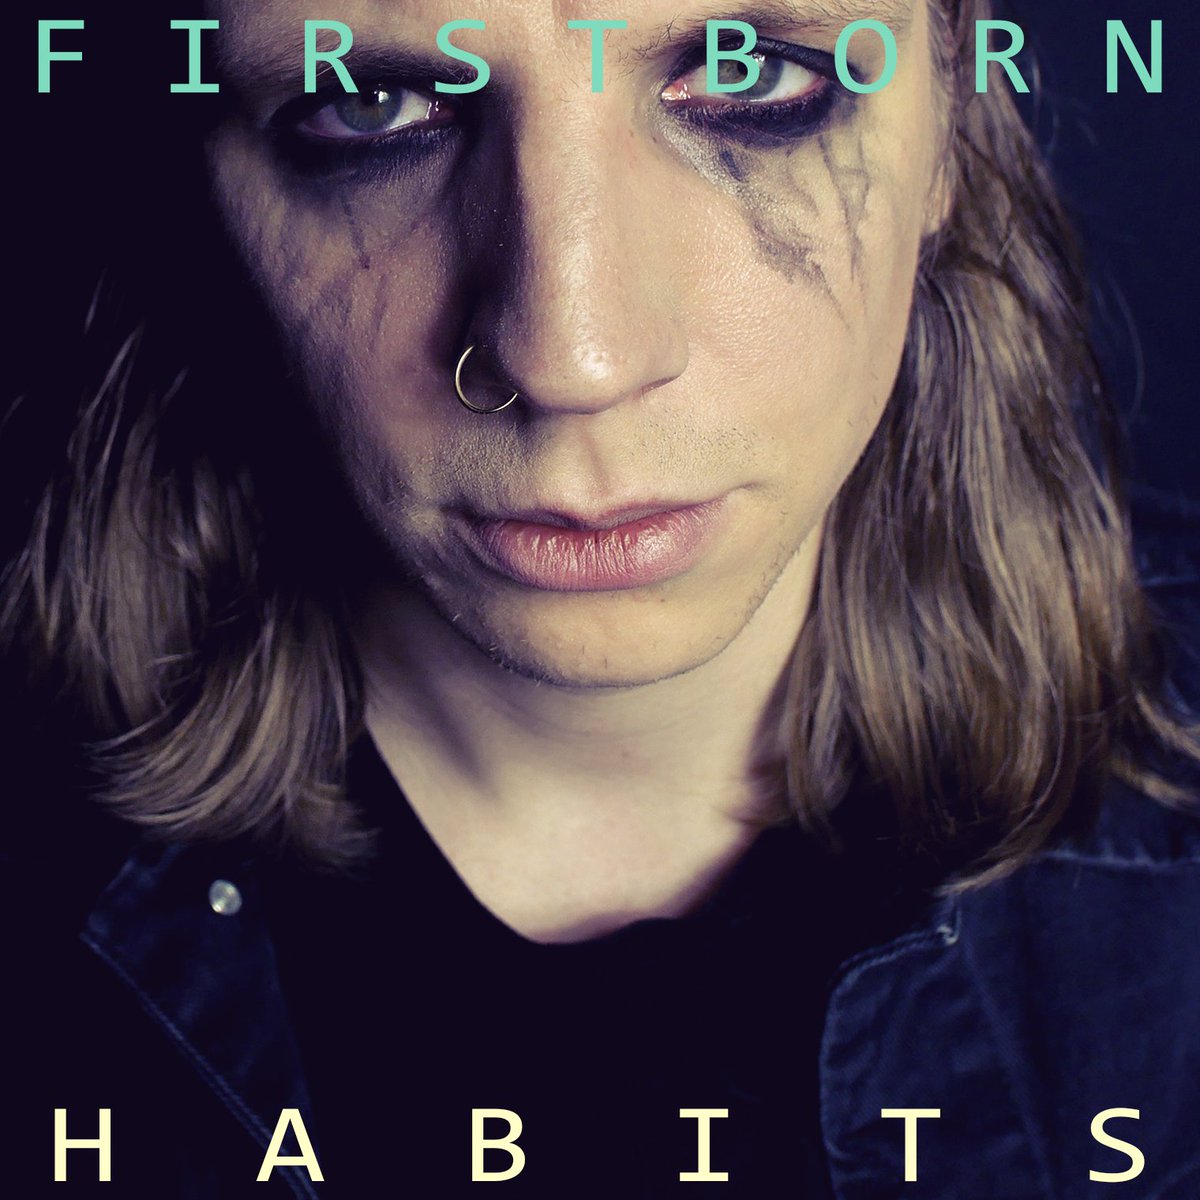 Listen to our version of @ToveLo ' HABITS on Spotify :) bit.ly/SPOTIFYFIRSTBO…